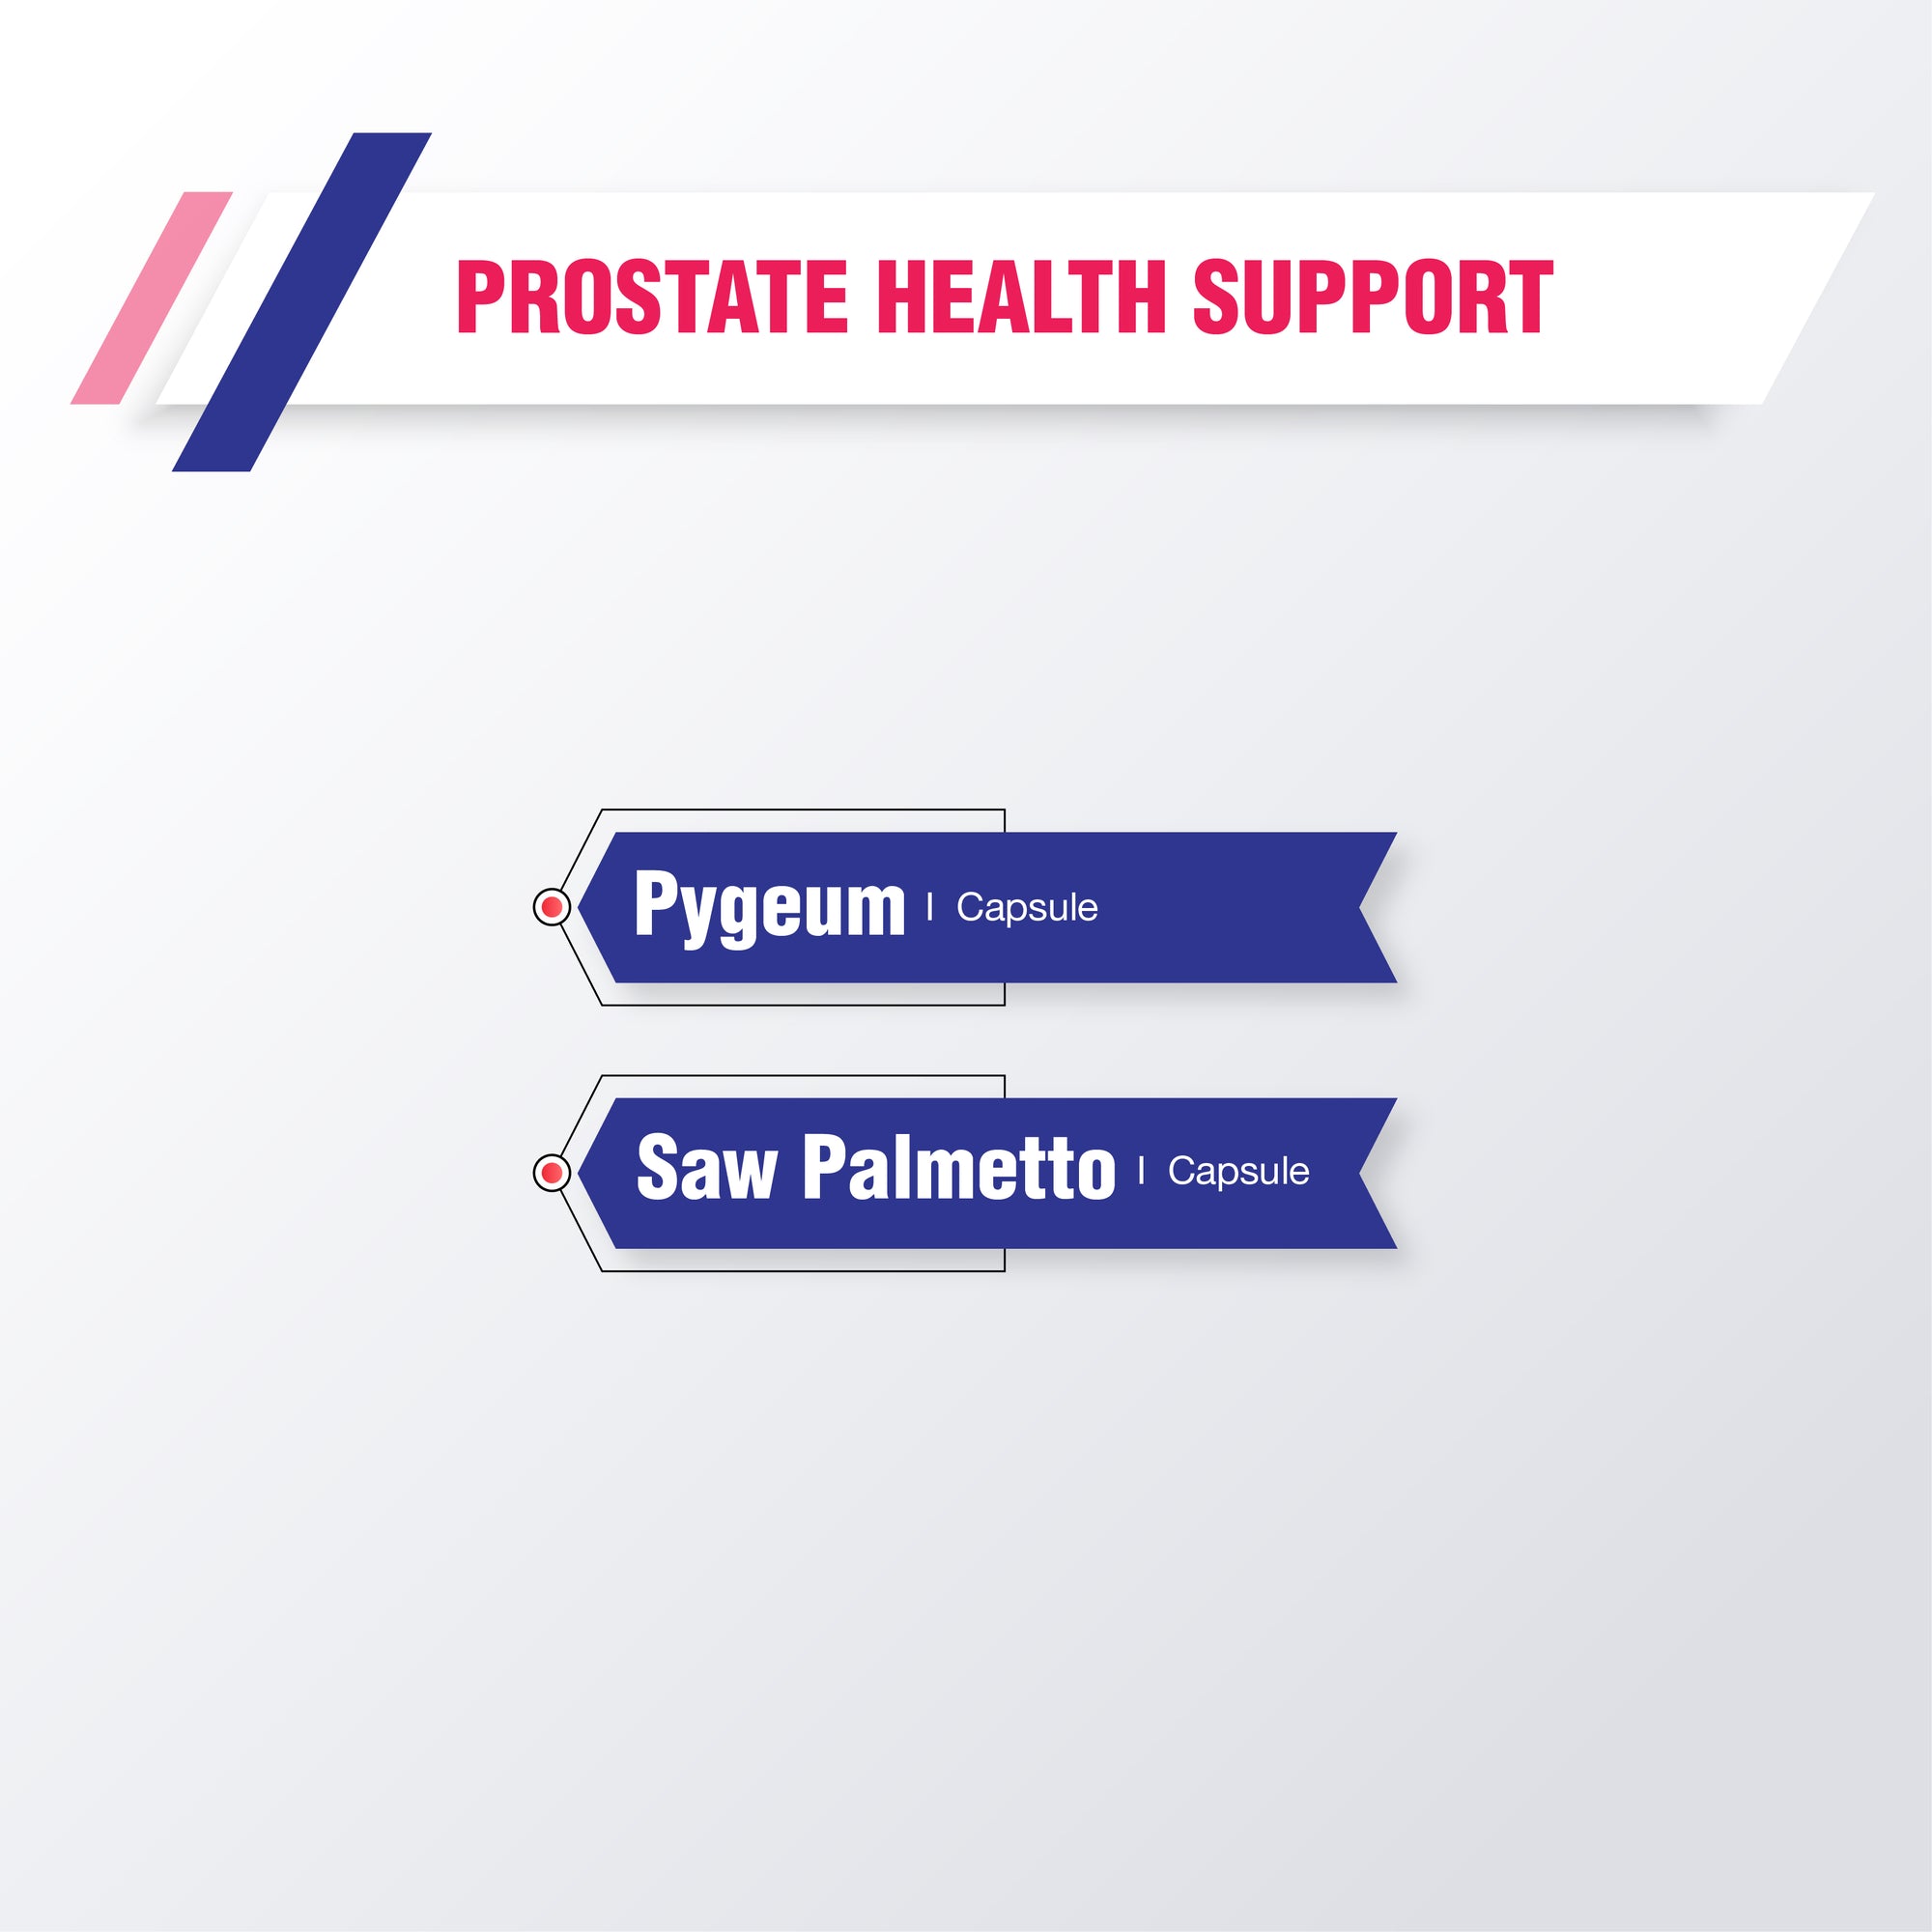 Prostate Health support